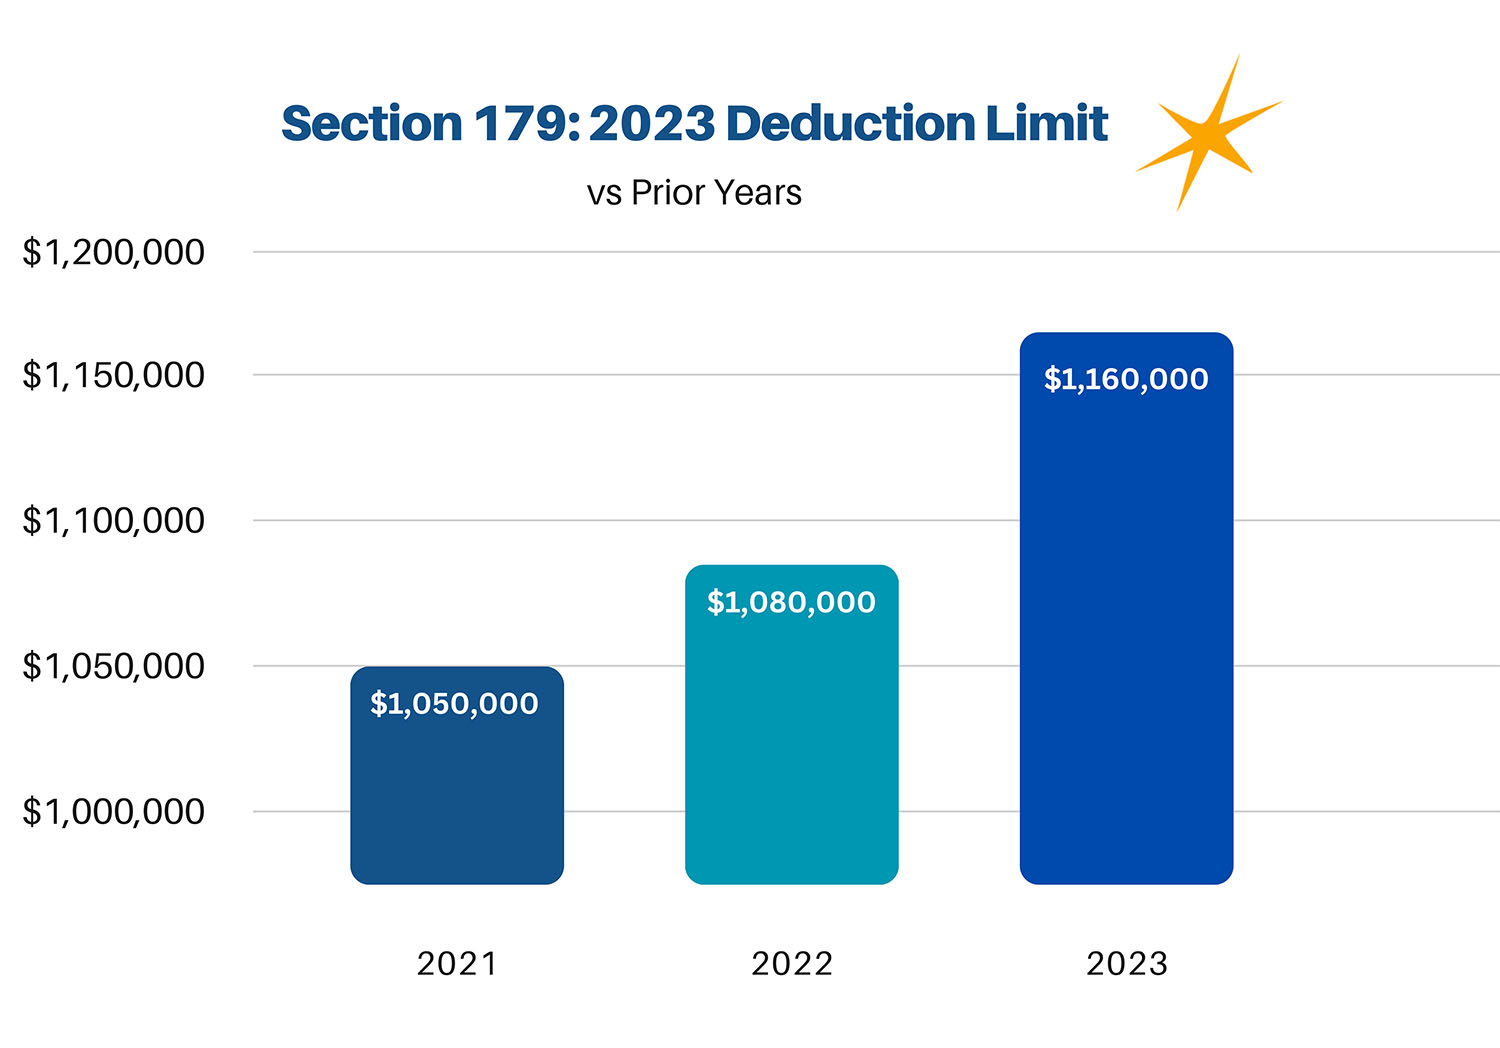 Section 179 deduction limit chart for 2023